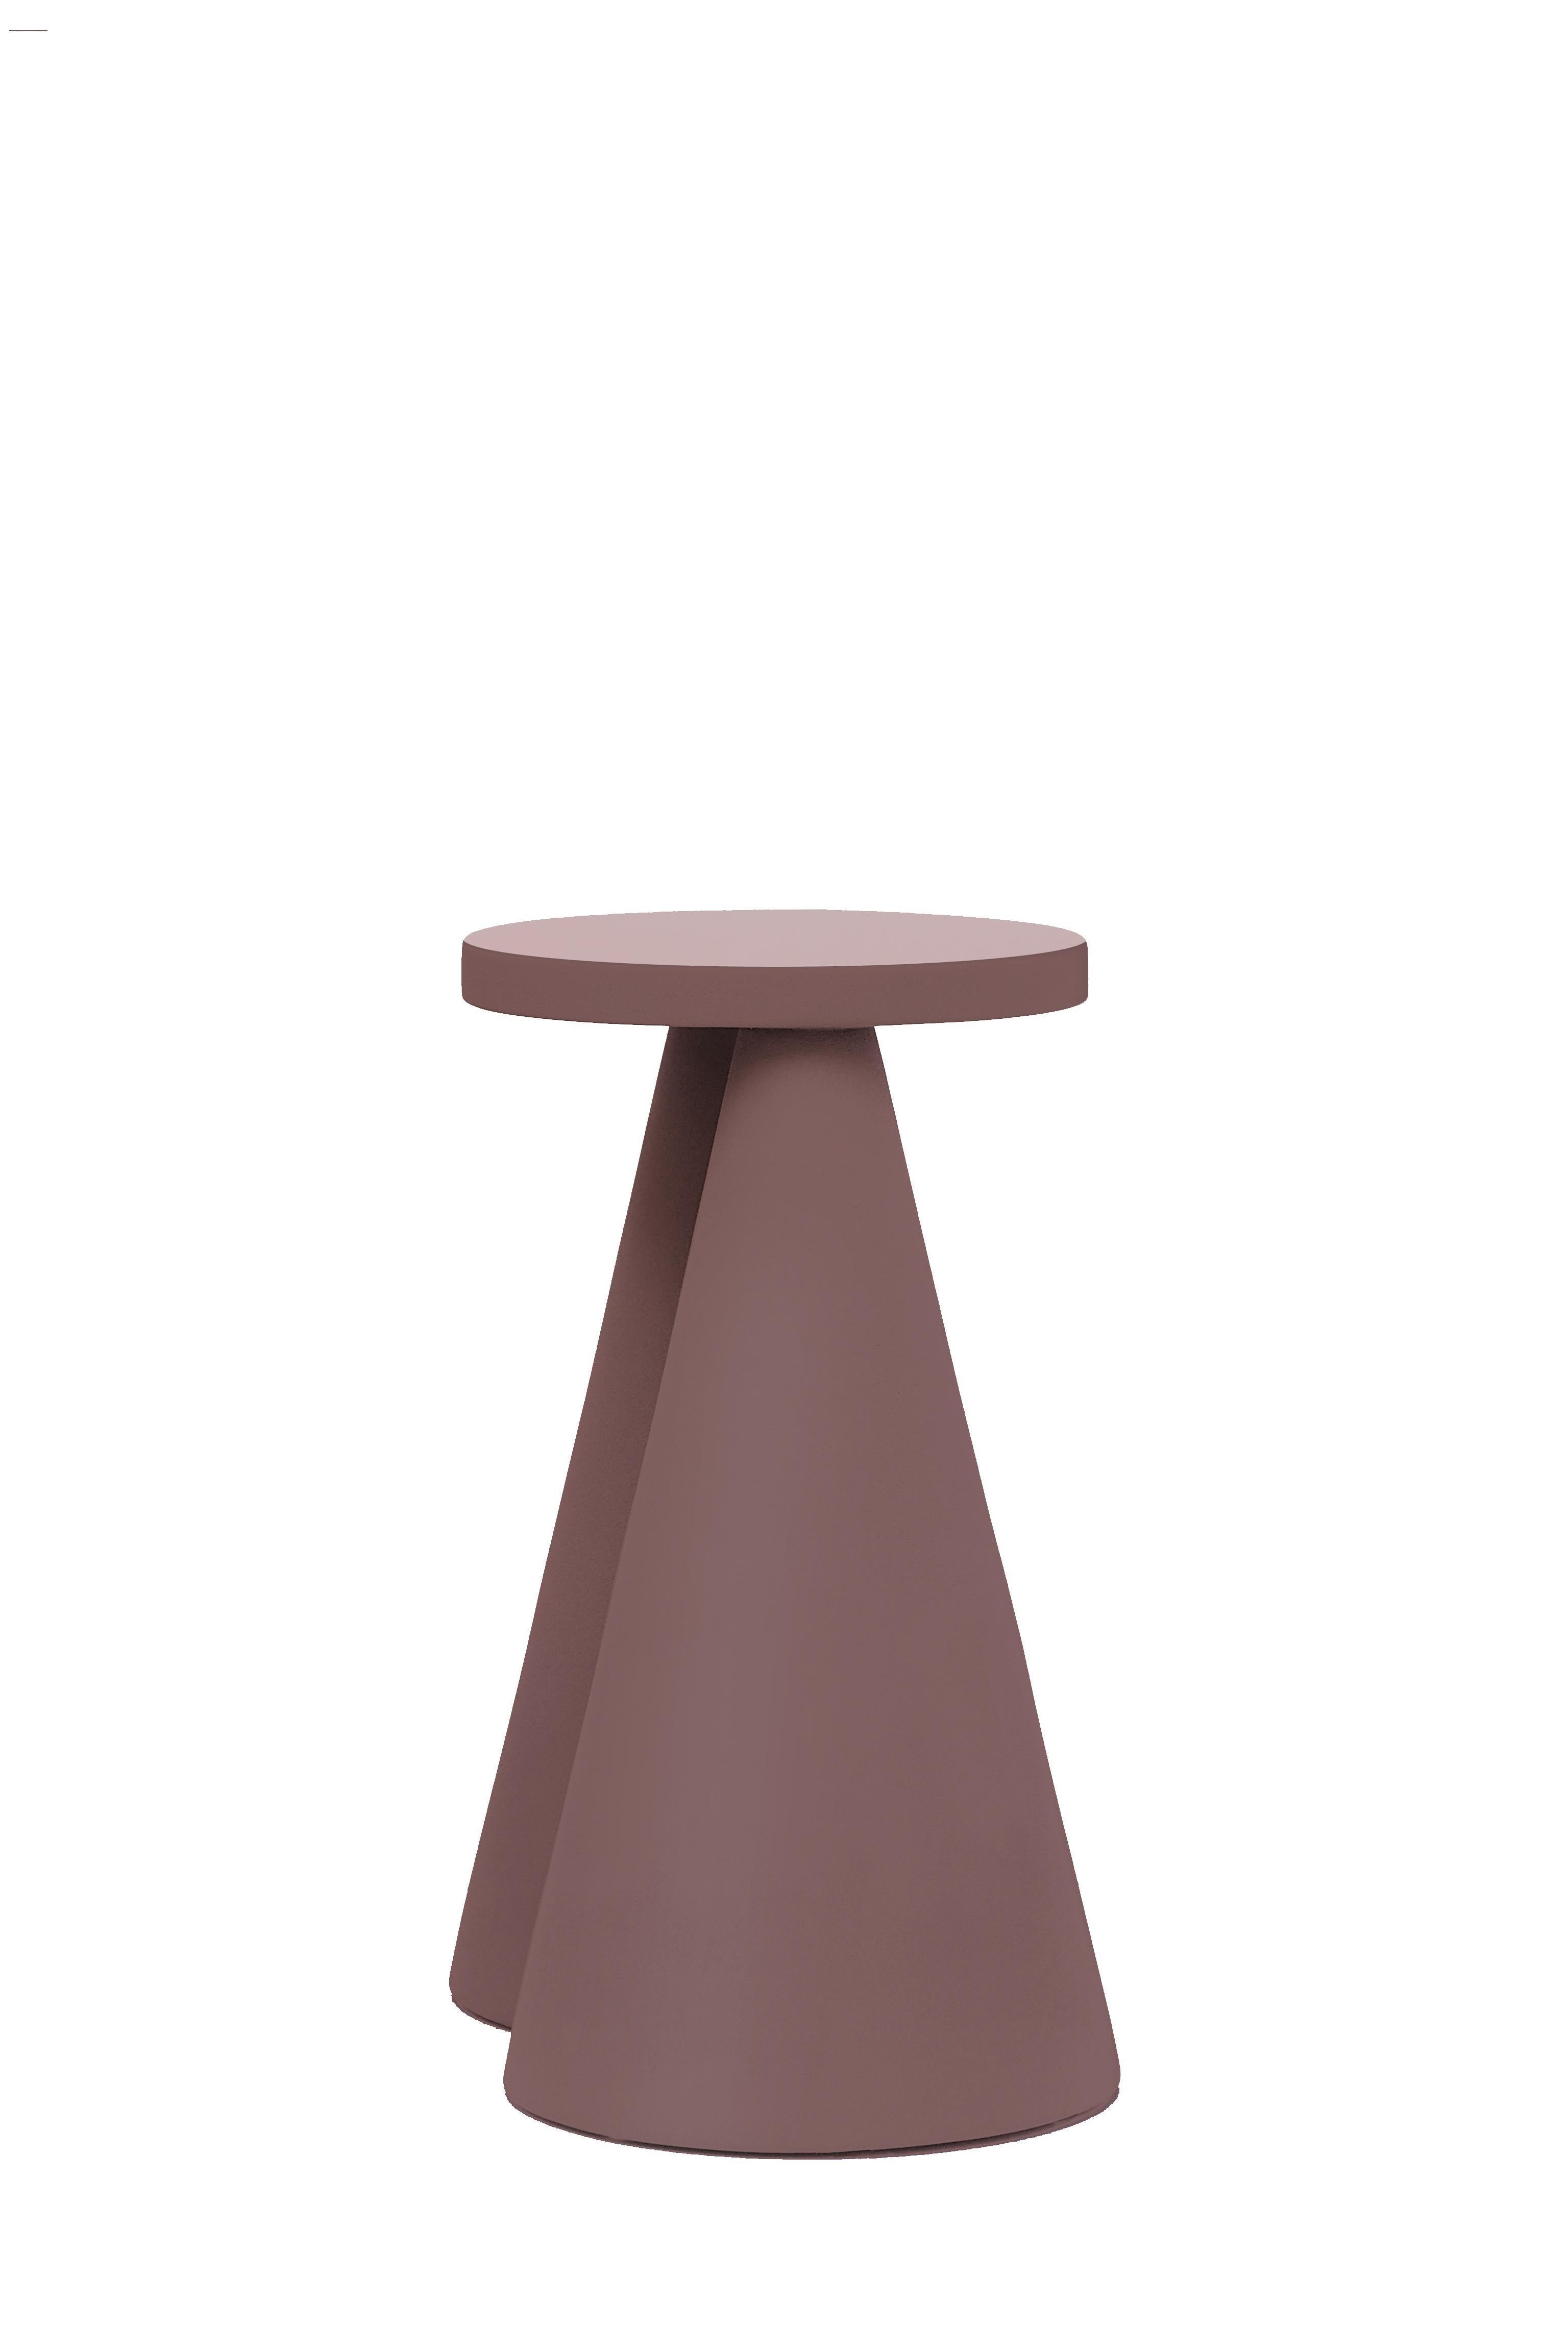 Modern Pair of Isola Side Table by Cara Davide